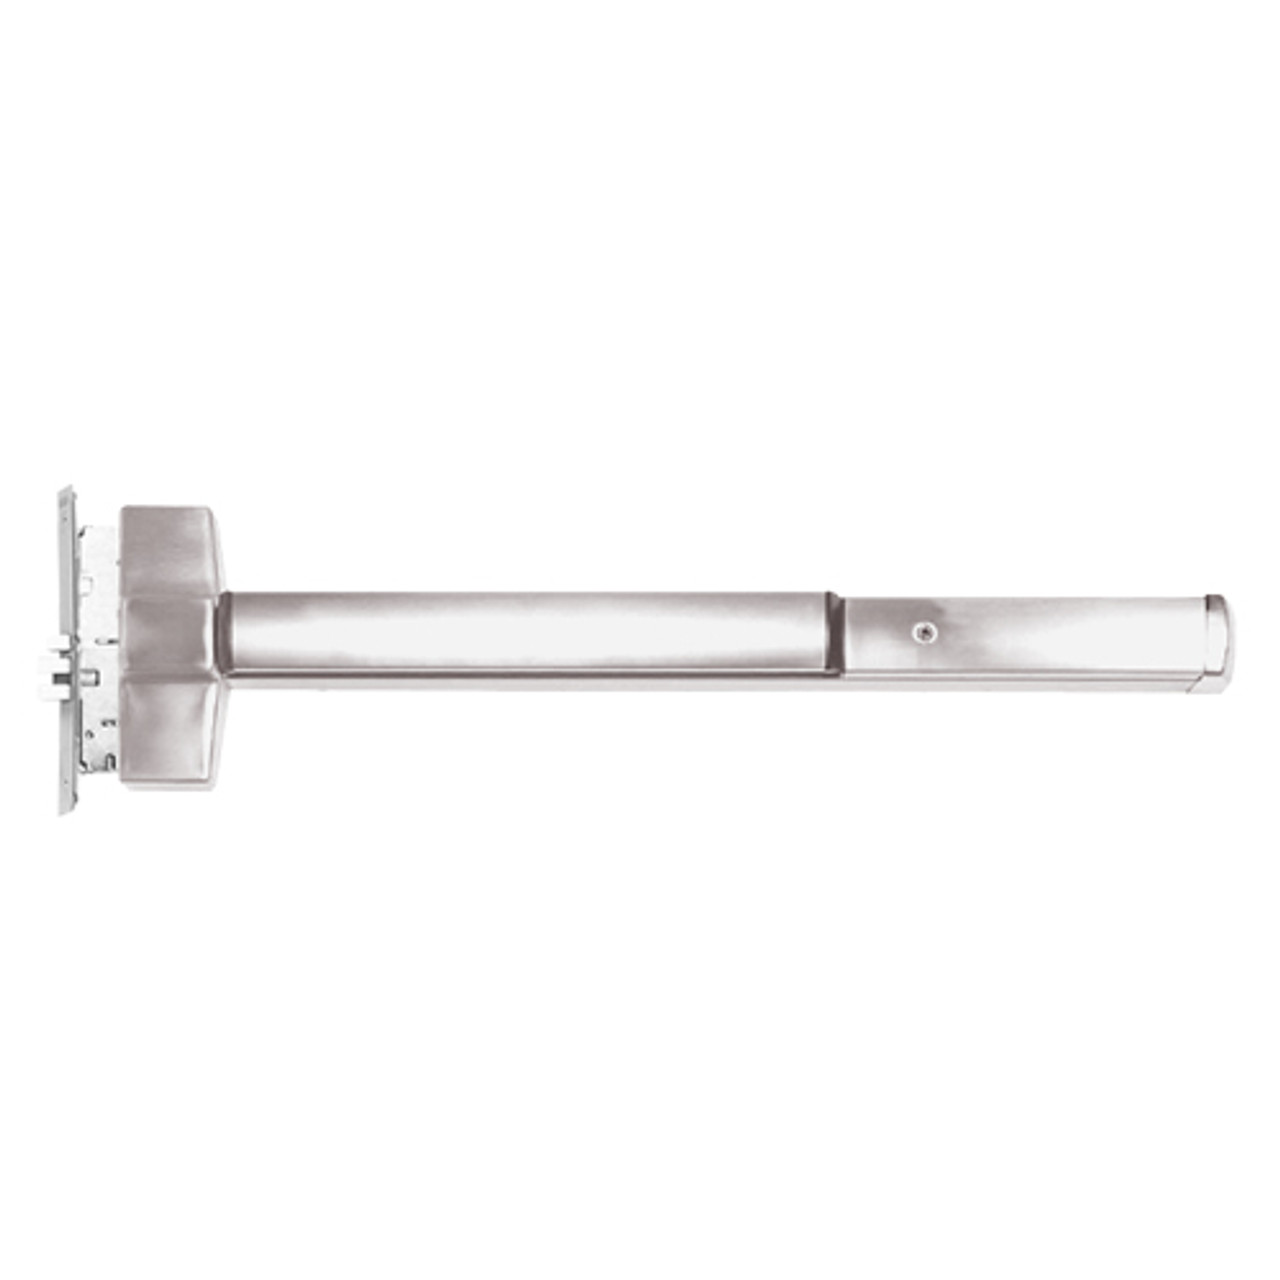 ED5600L-630-RHR-SEC Corbin ED5600 Series Non Fire Rated Mortise Exit Device in Satin Stainless Steel Finish